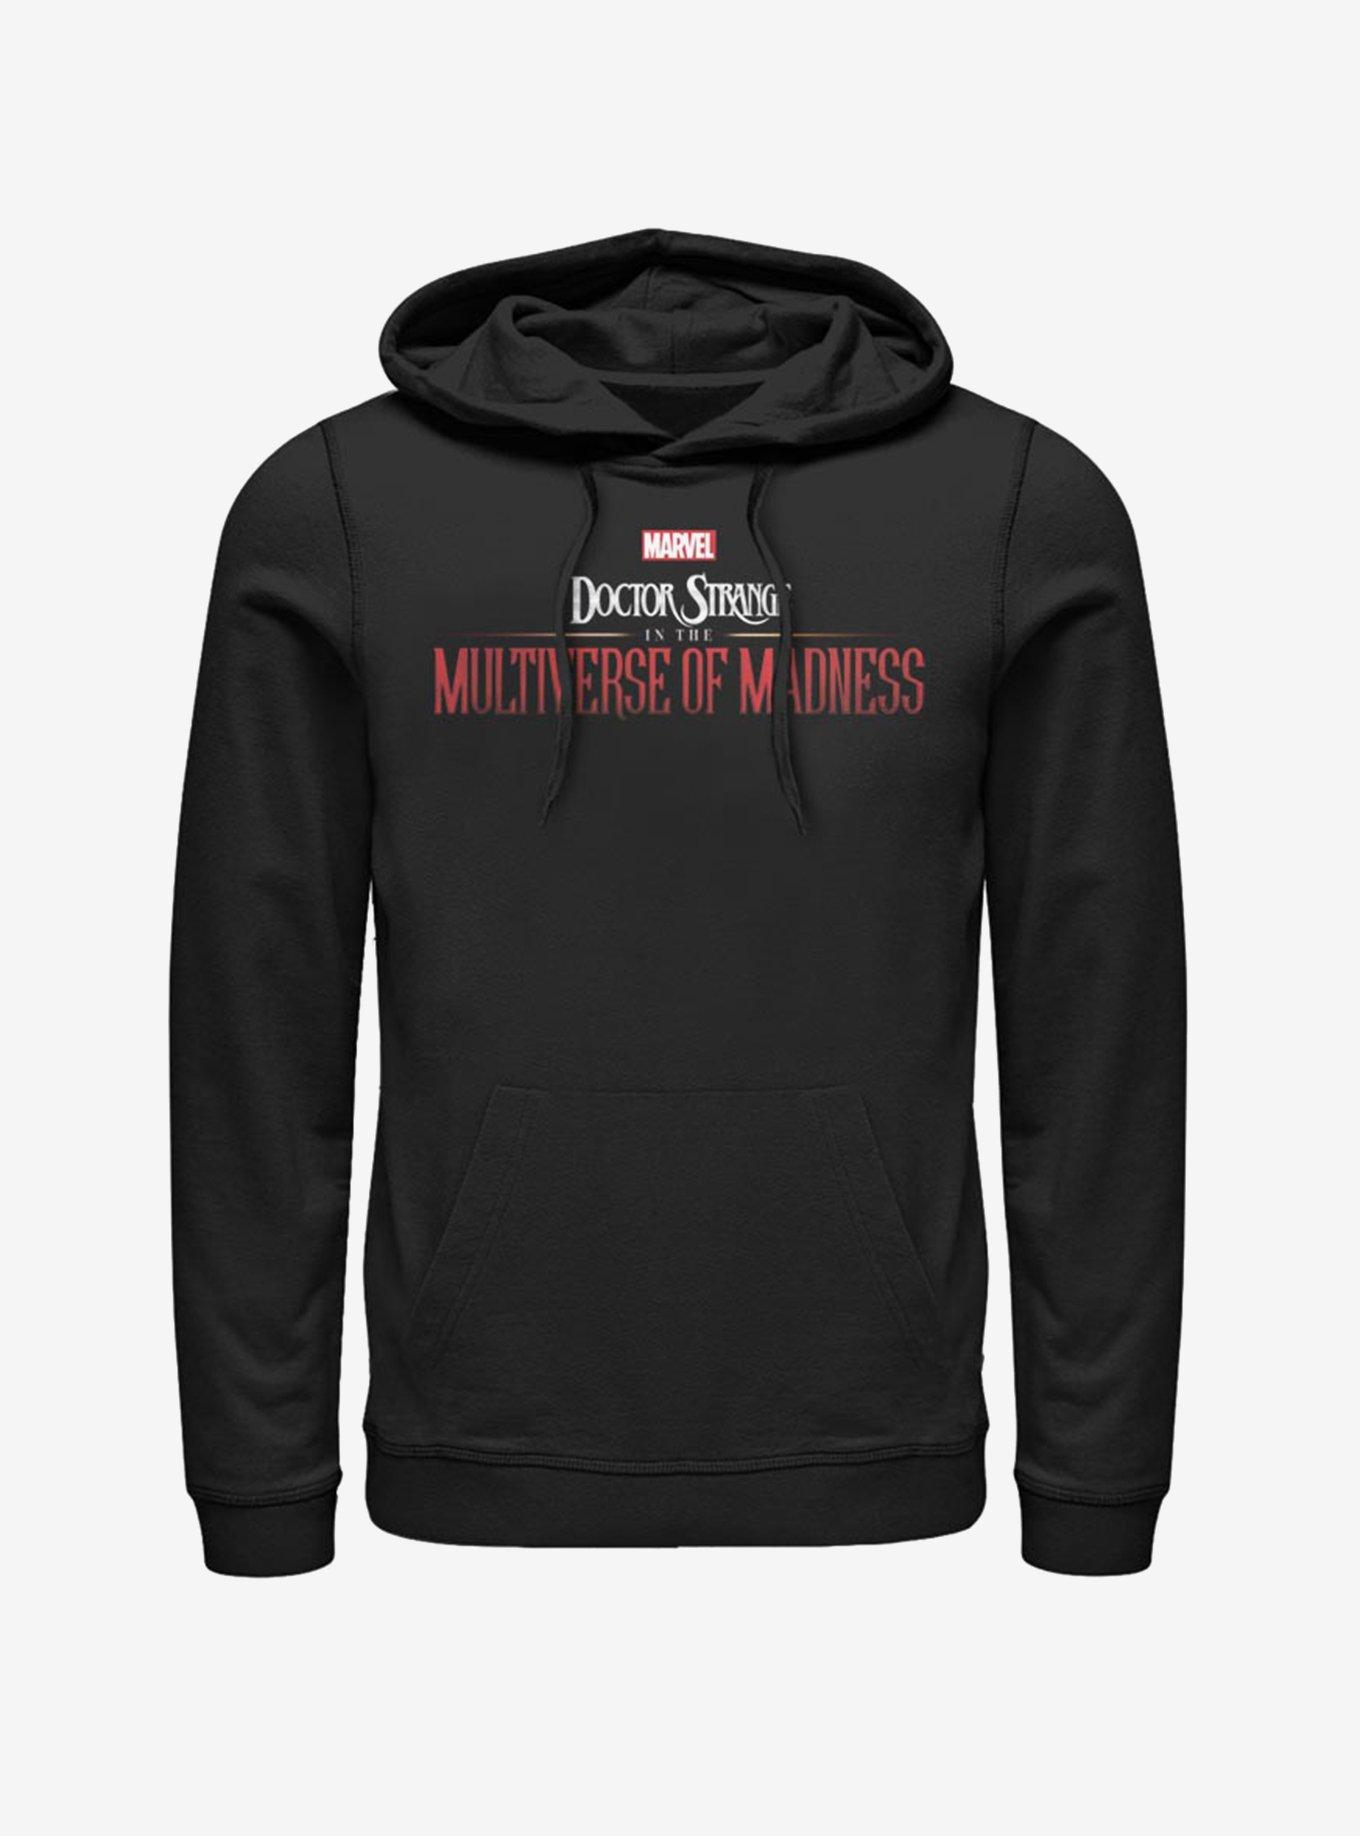 Marvel Doctor Strange In The Multiverse Of Madness Hoodie, BLACK, hi-res